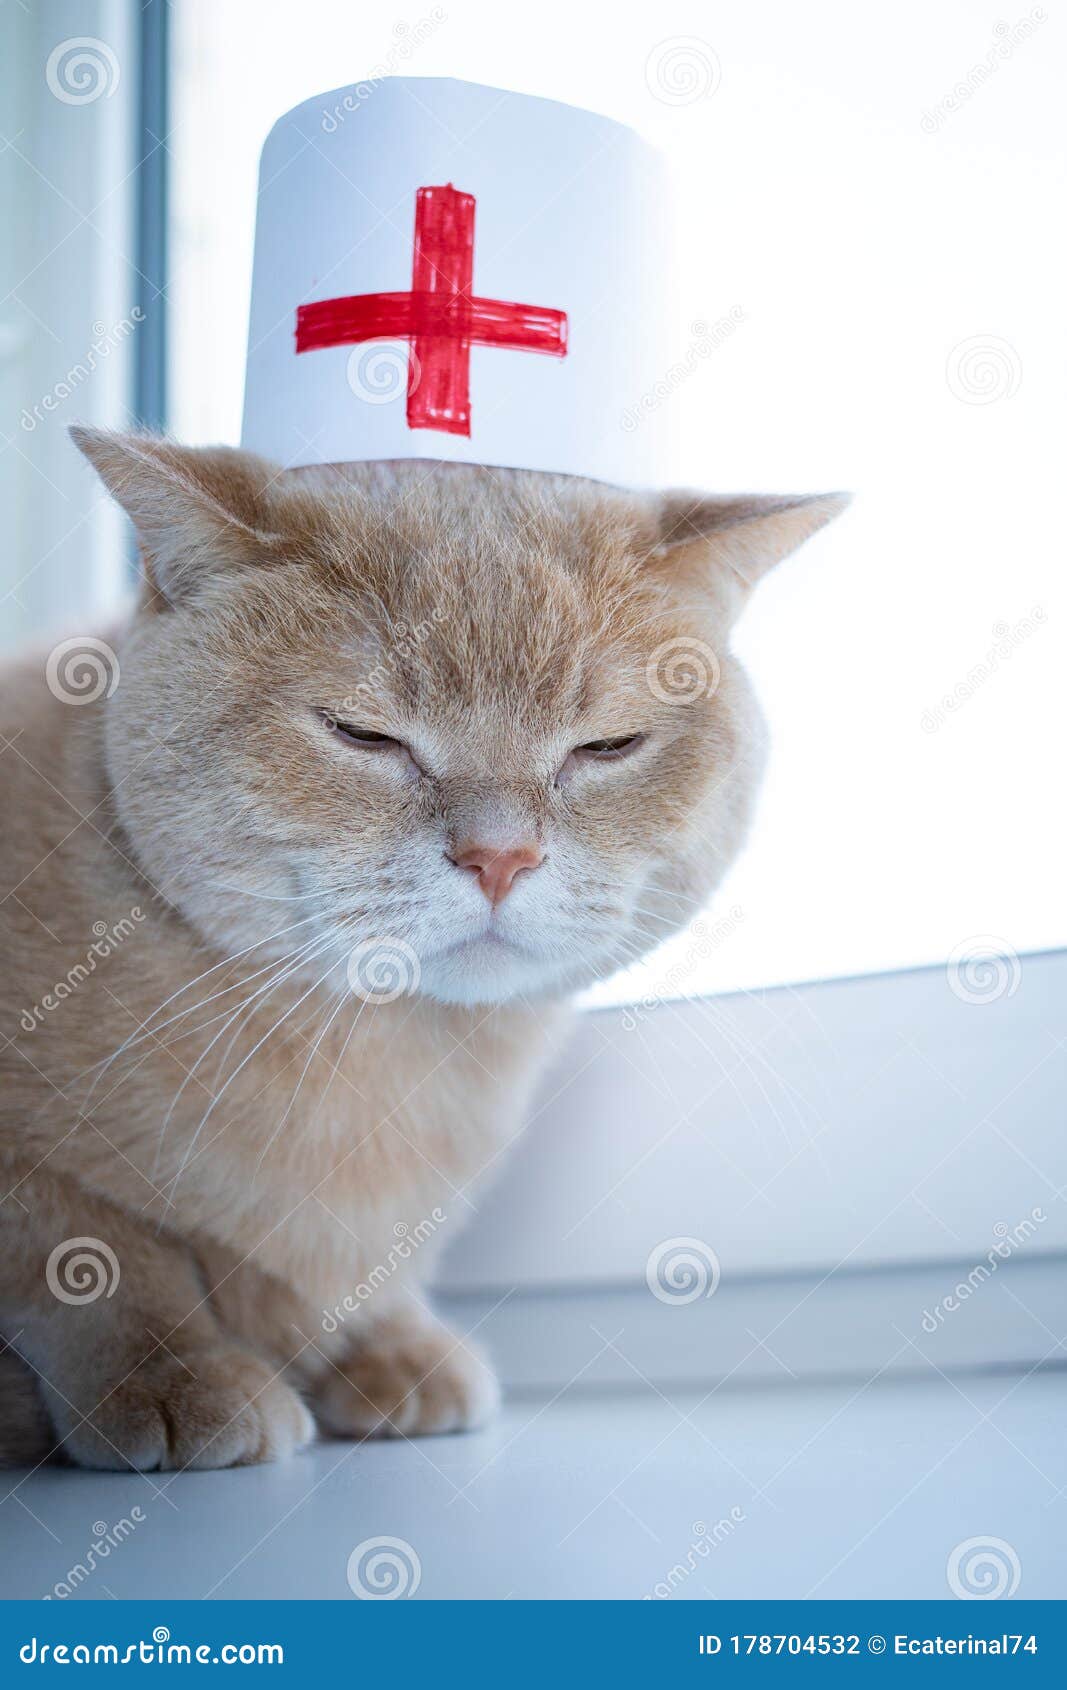 Chelyabinsk, RussiaMarch 21, 2020. Angry Beige Cat In A Medical Cap